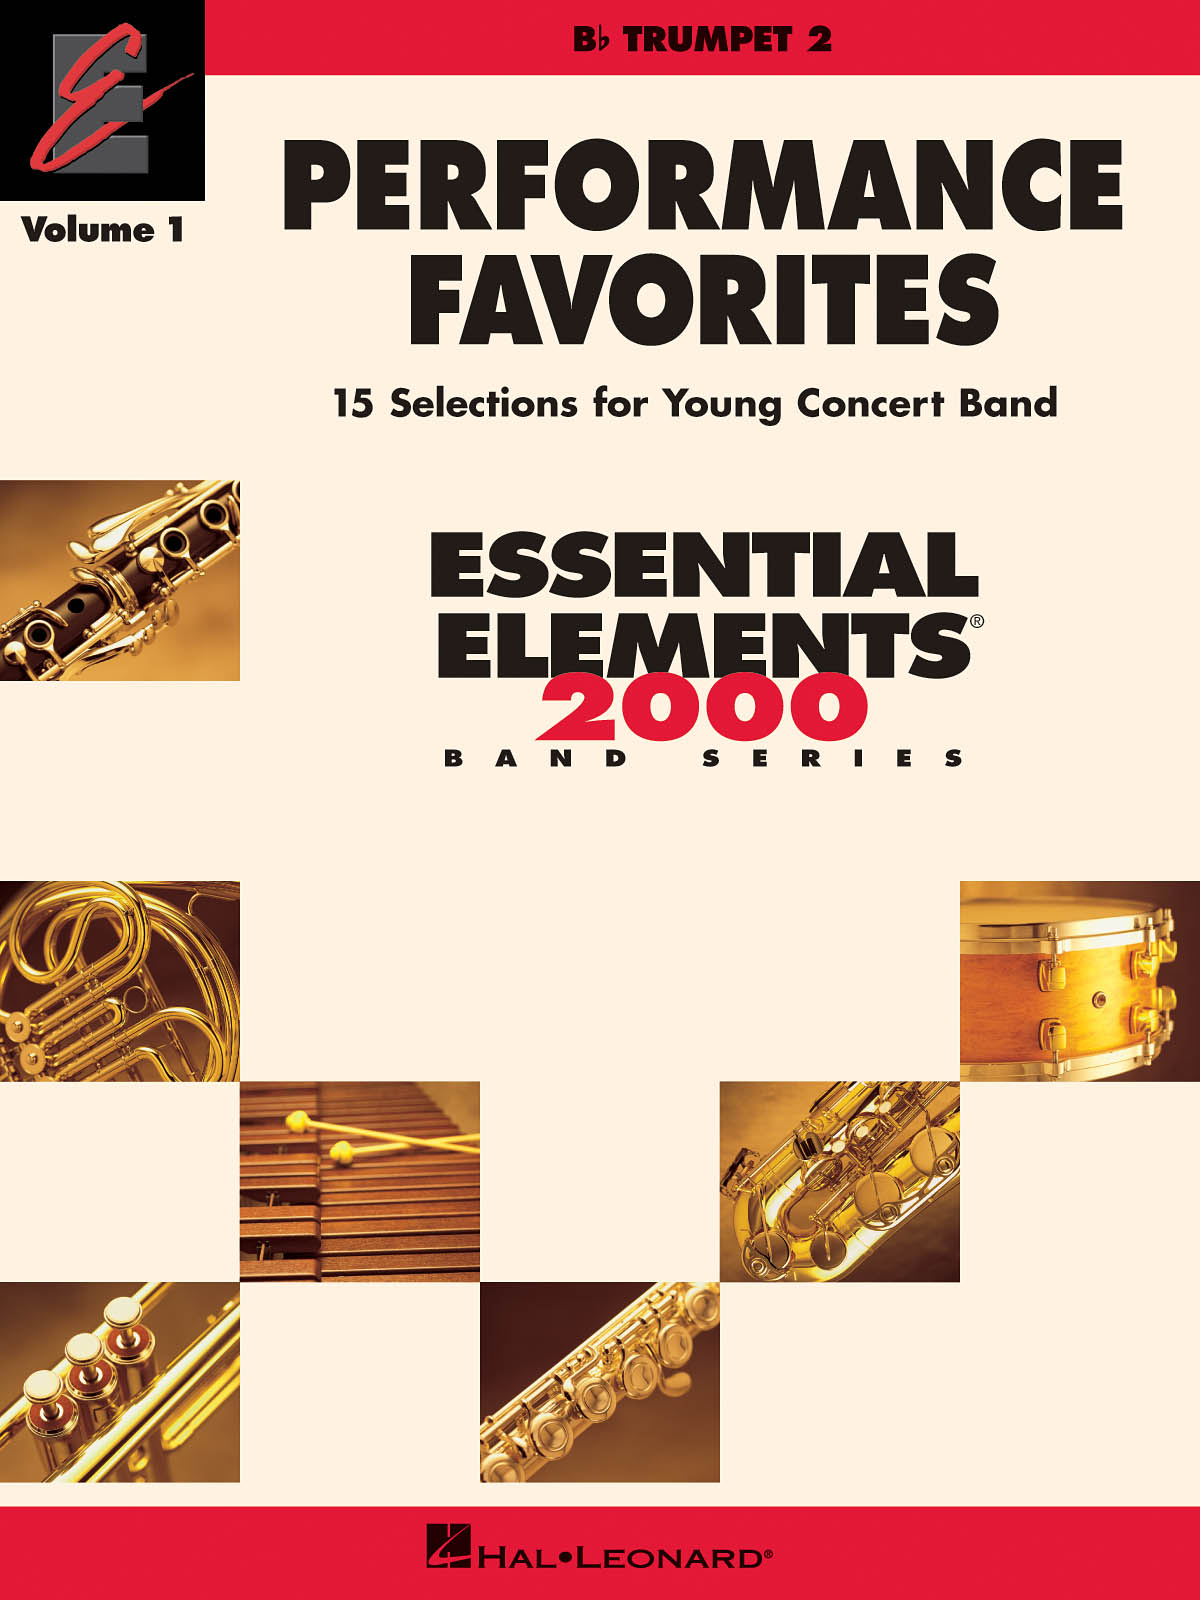 Performance Favorites Vol. 1 - Trumpet 2 - 15 Selections for Young Concert Band - noty na trubku